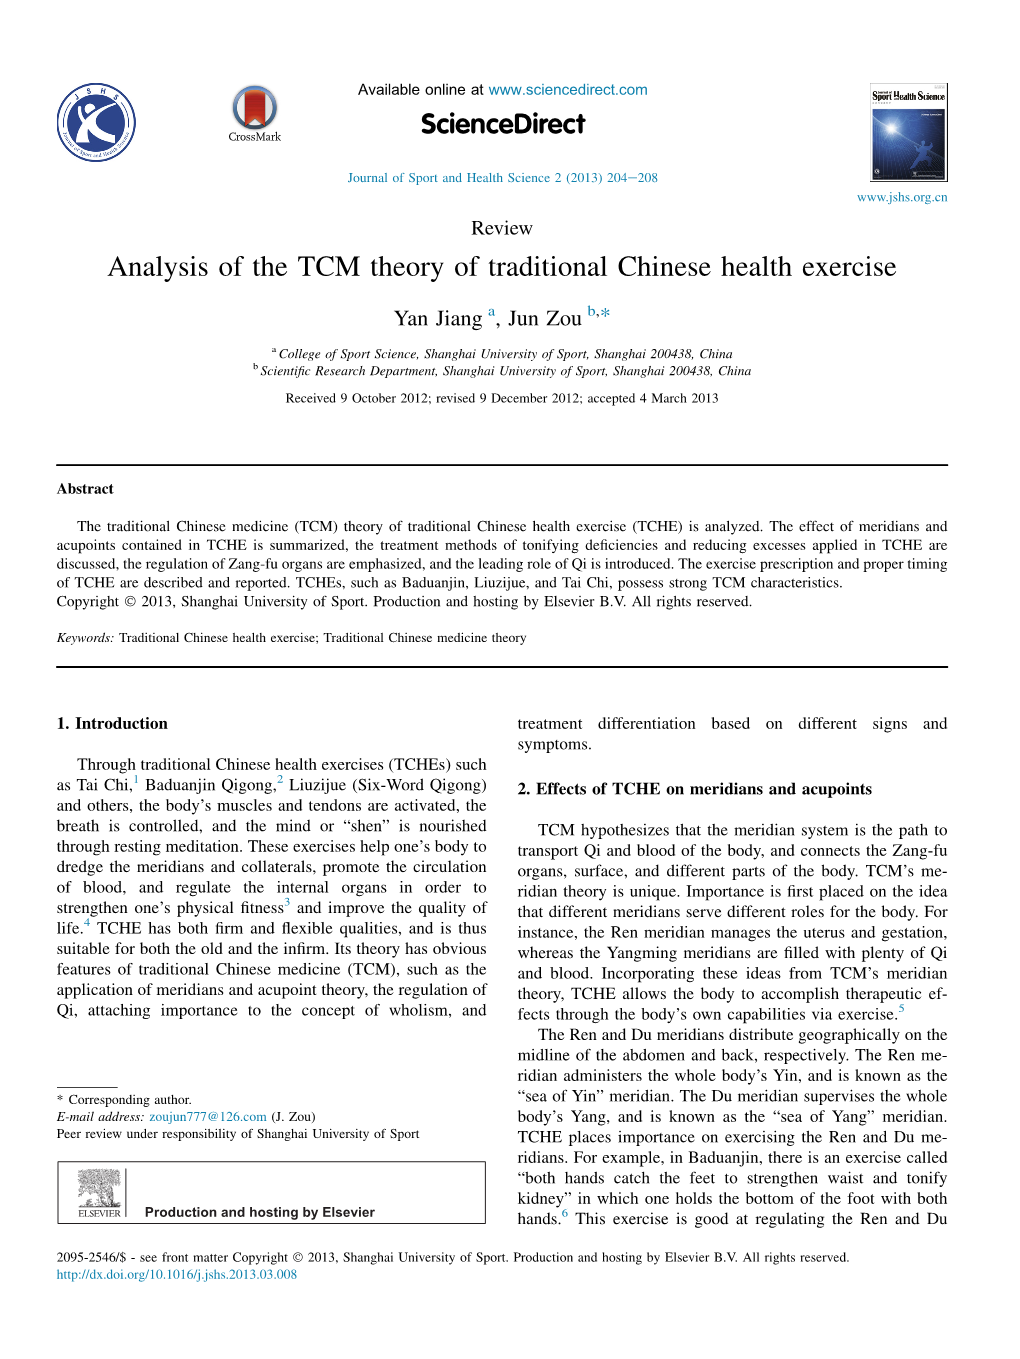 Analysis of the TCM Theory of Traditional Chinese Health Exercise